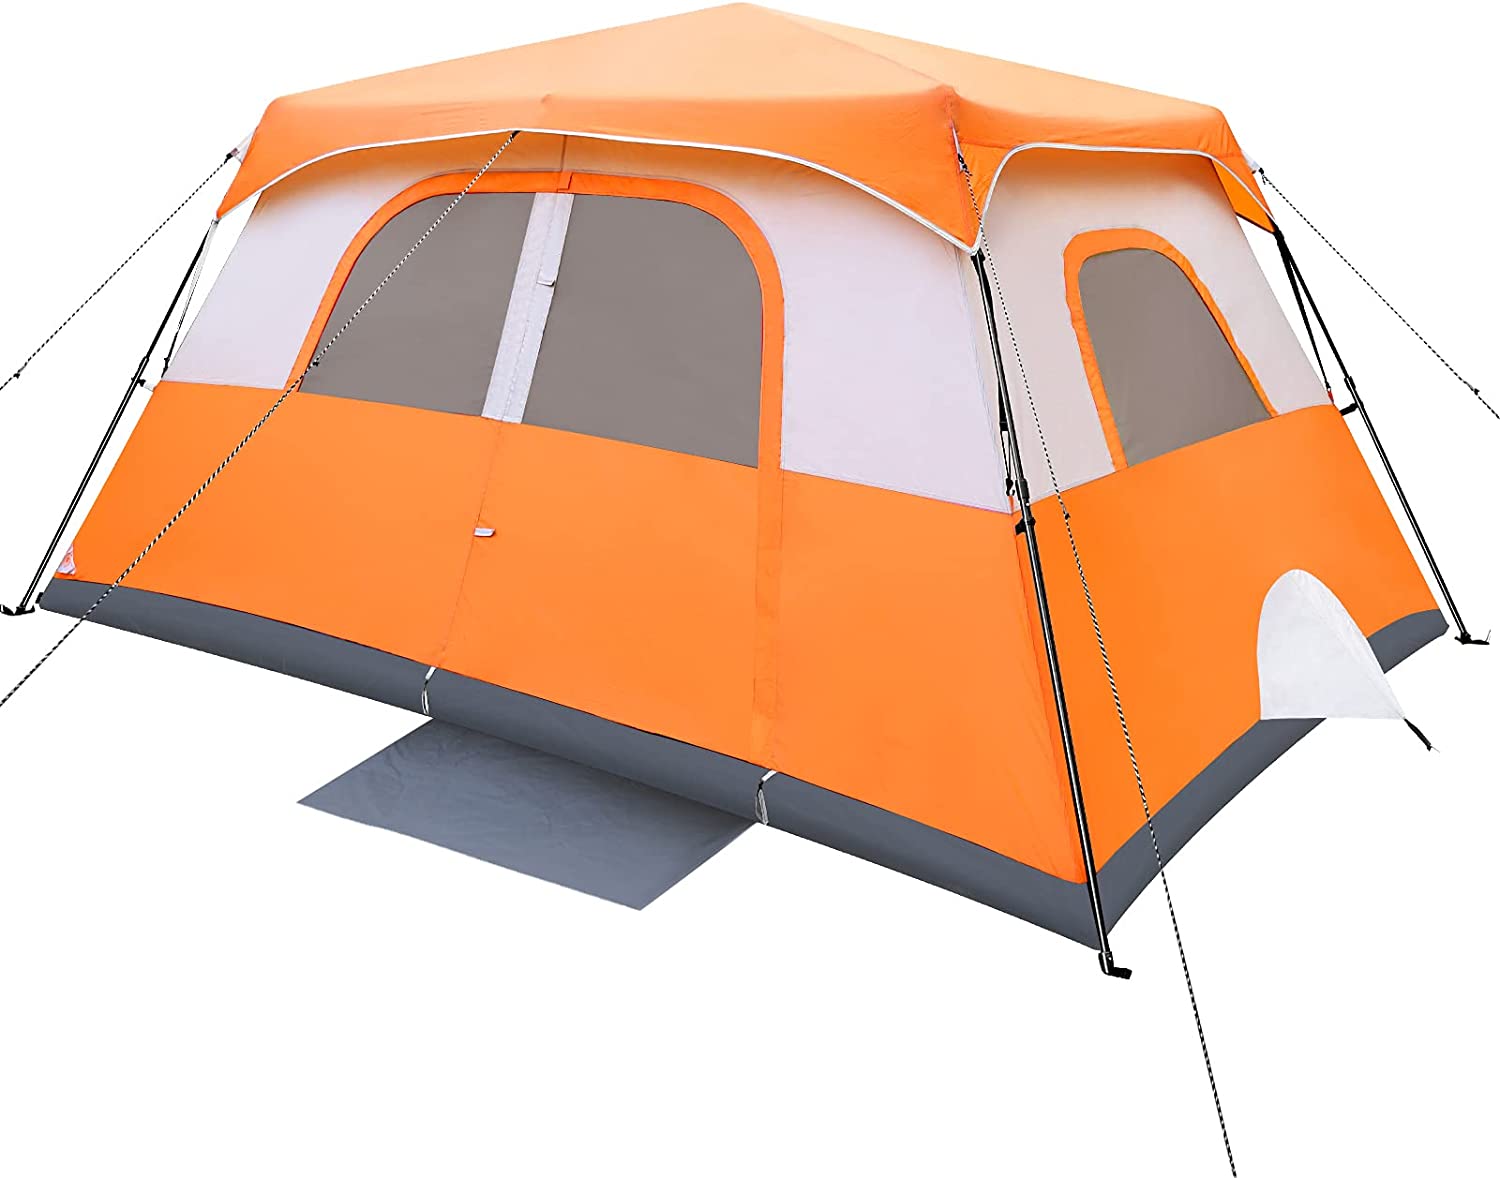 Tent, 6/8/10 Person 60 Sec Setup Family Camping Tent, Waterproof & Windproof Tent with Top Rainfly, Instant Cabin Tent, Upgraded Ventilation System, Orange